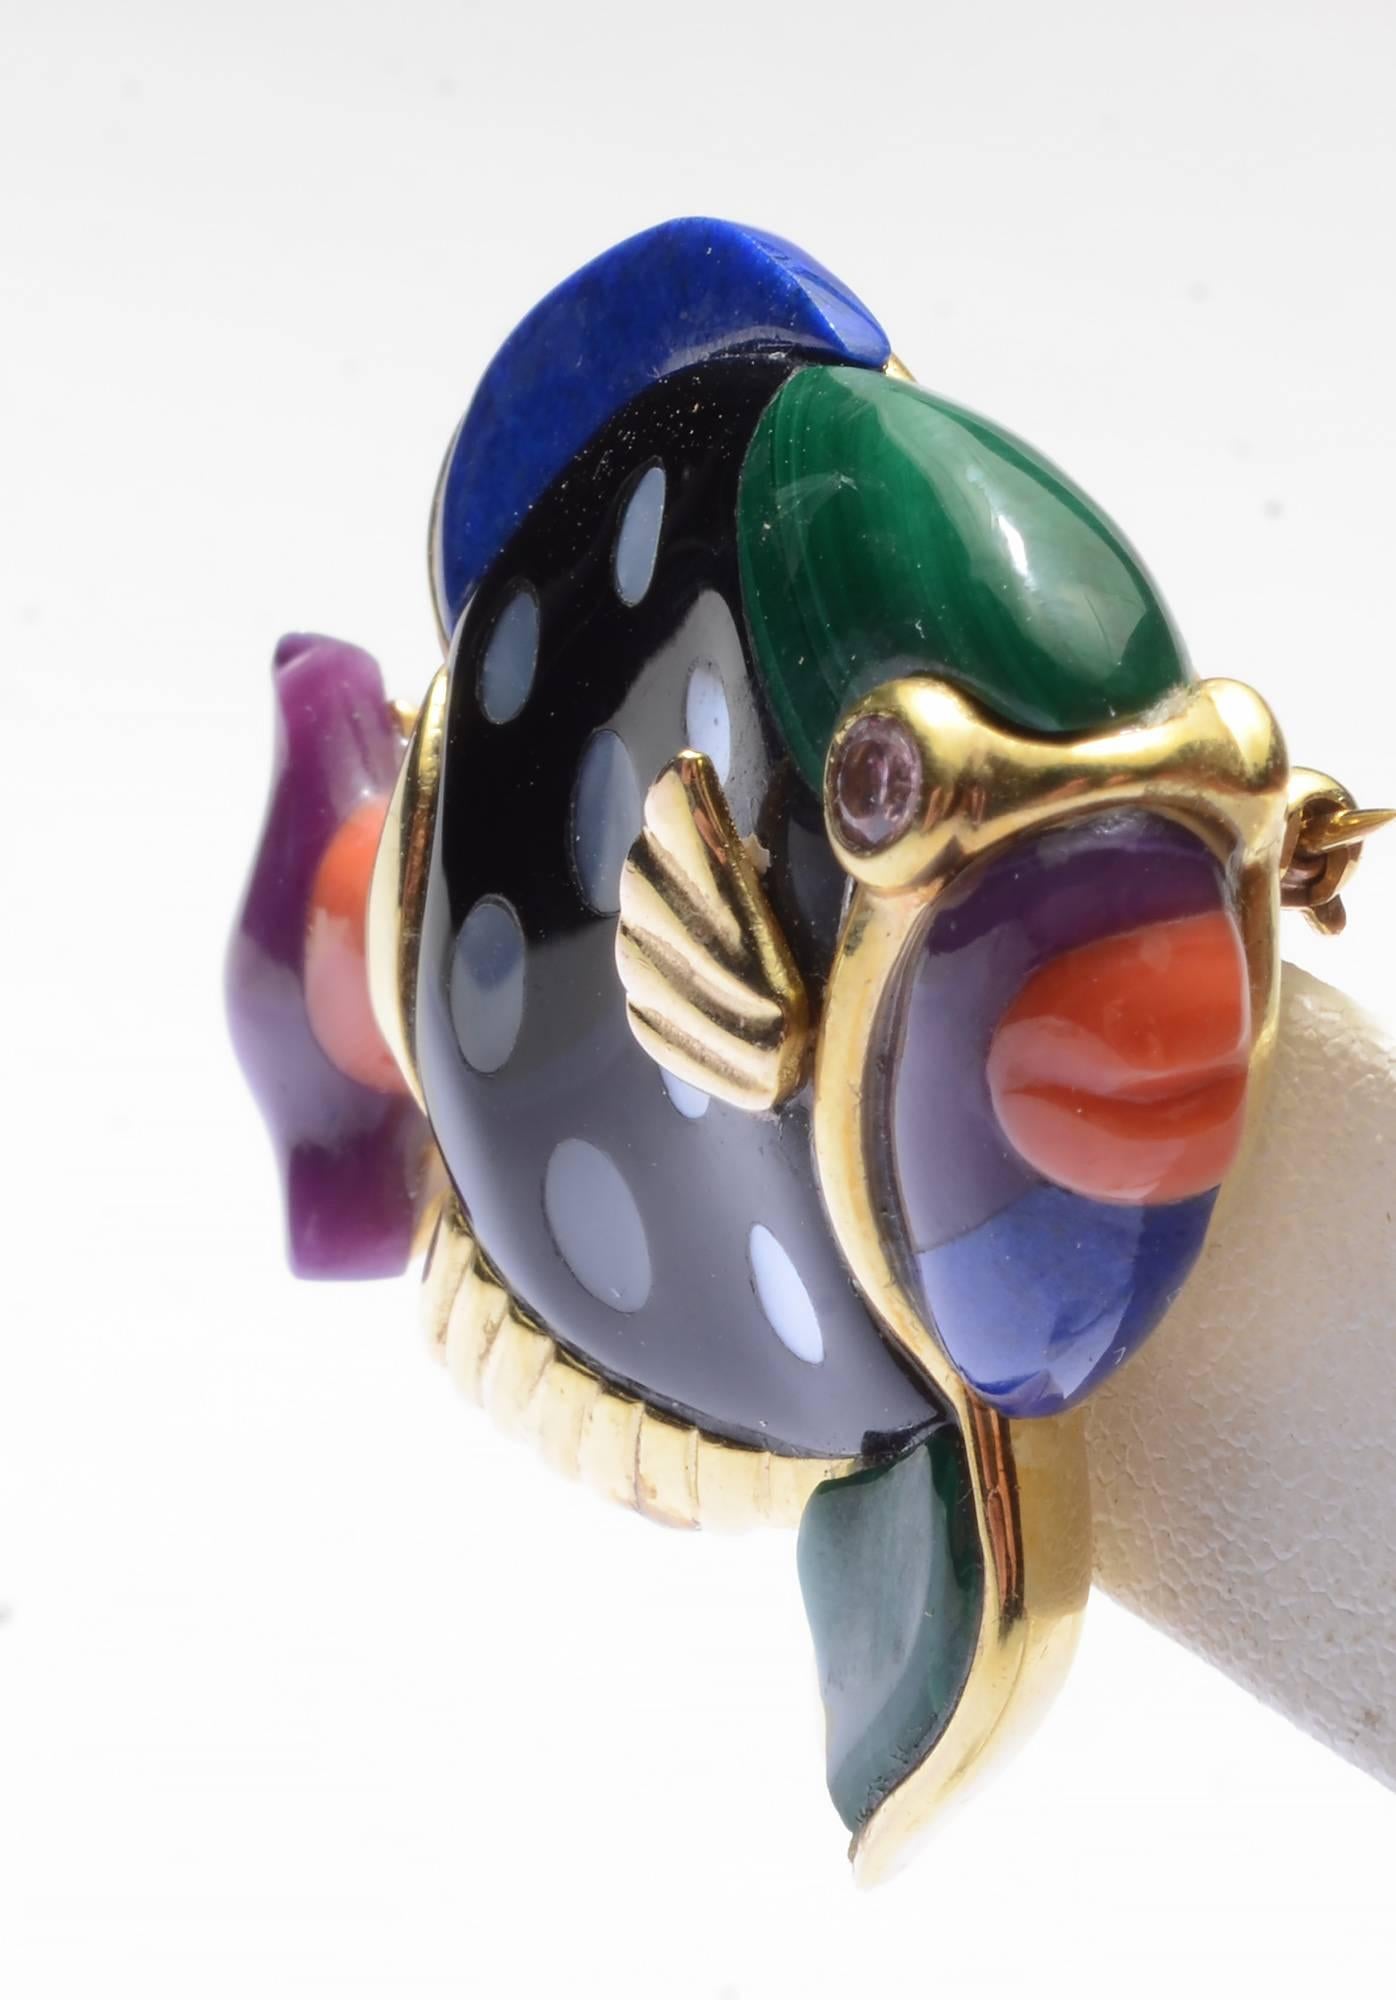 This colorful and whimsical fish brooch by Asch Grossbardt is made with the variety of inlaid stones for which they are known. The body is onyx with irregular polka dots of mother of pearl. Additional stones are: malachite; lapis lazuli; purple